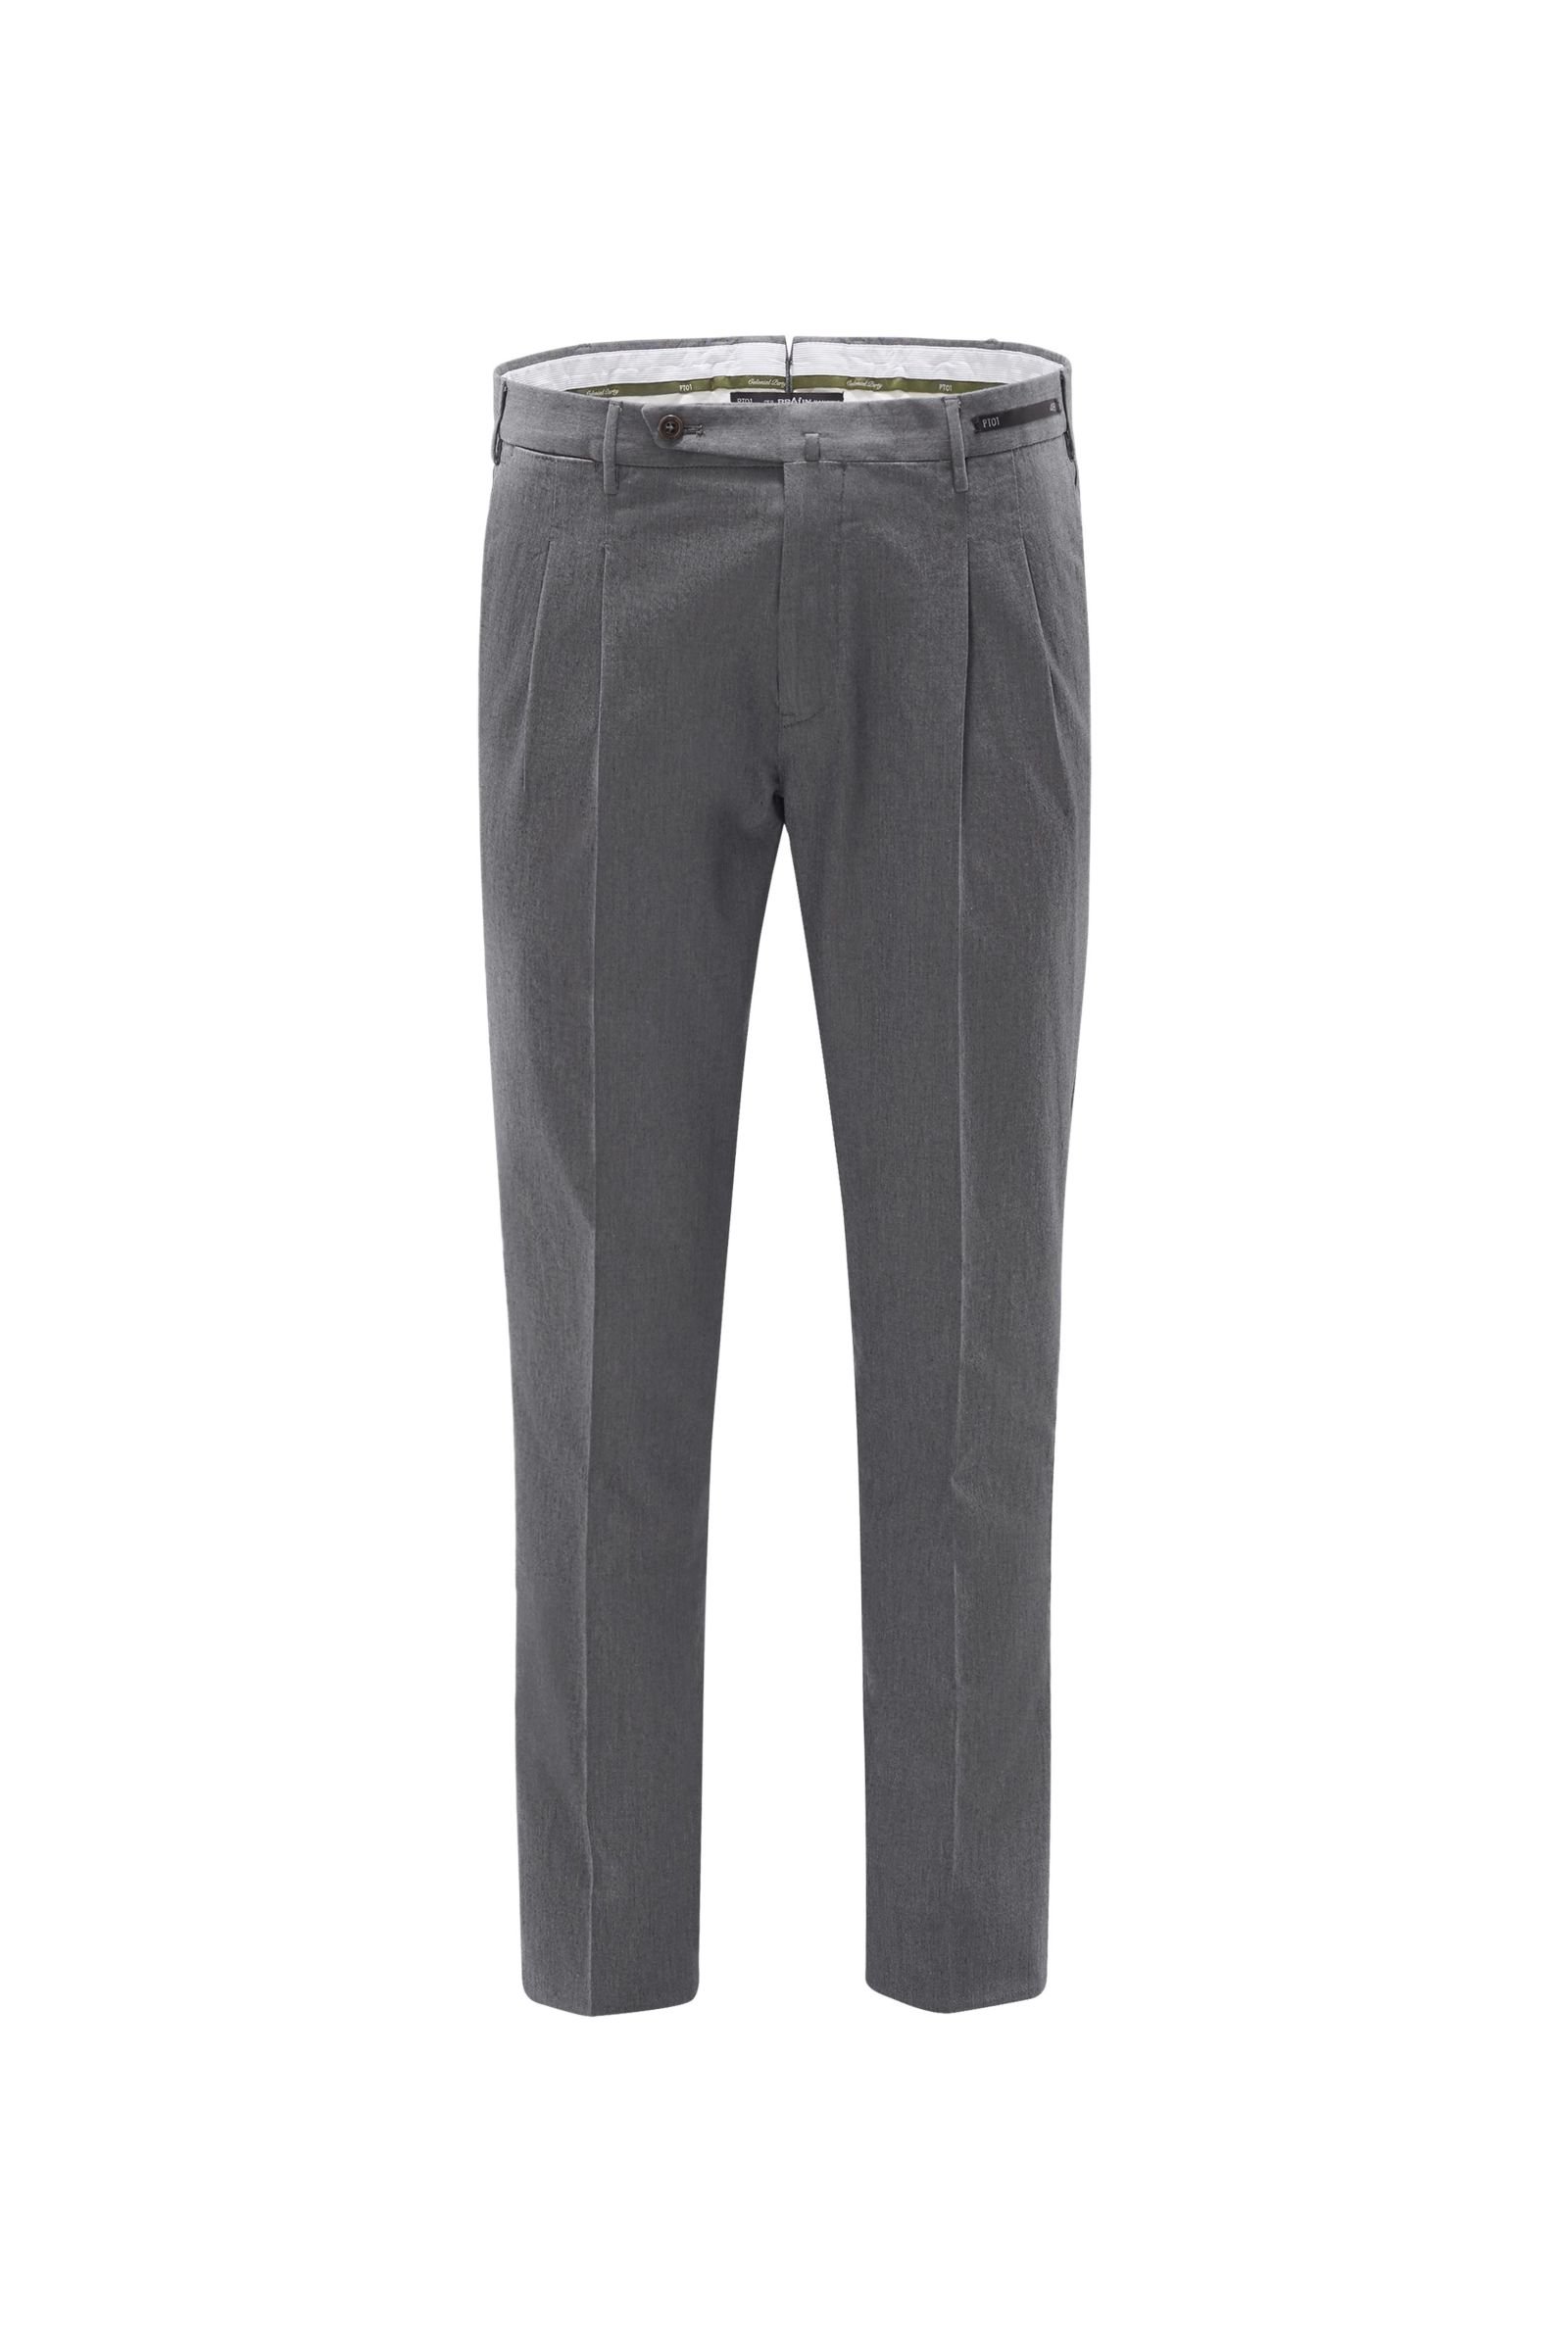 Chambray trousers 'Colonial Party Bombay Hills Preppy Fit' grey